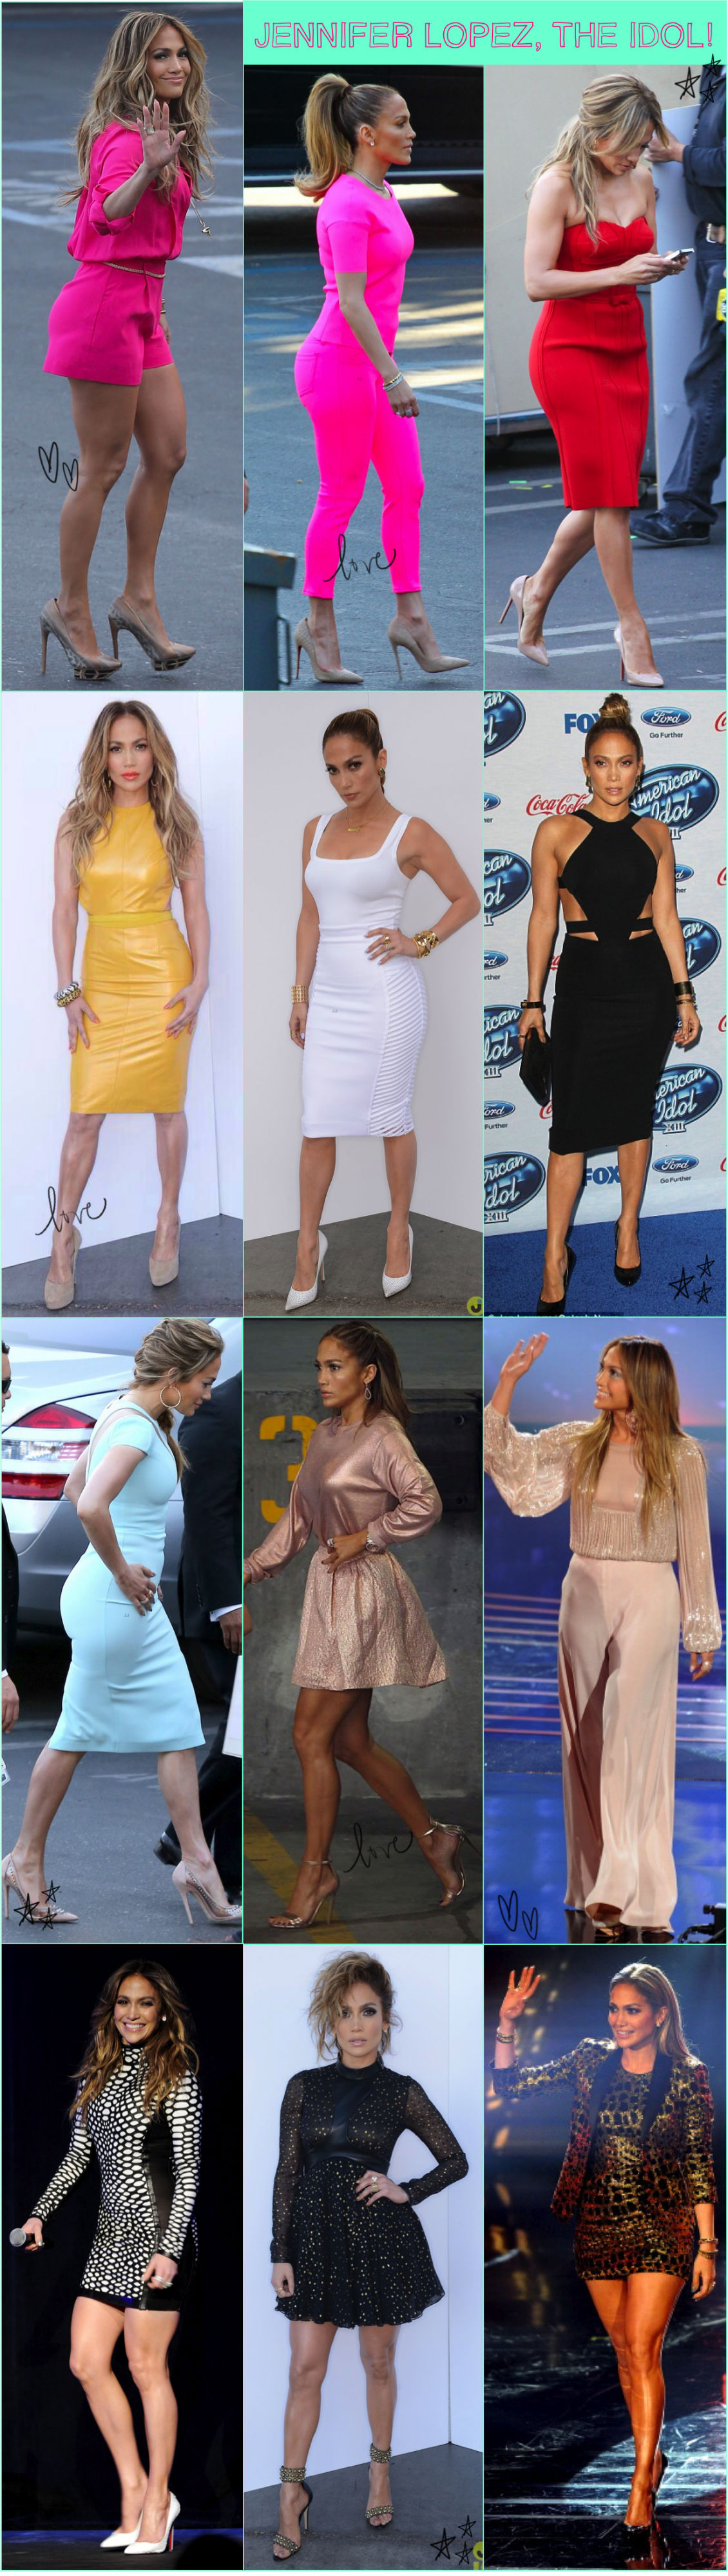 JLO AMERICAN IDOL LOOKS OUTFIT